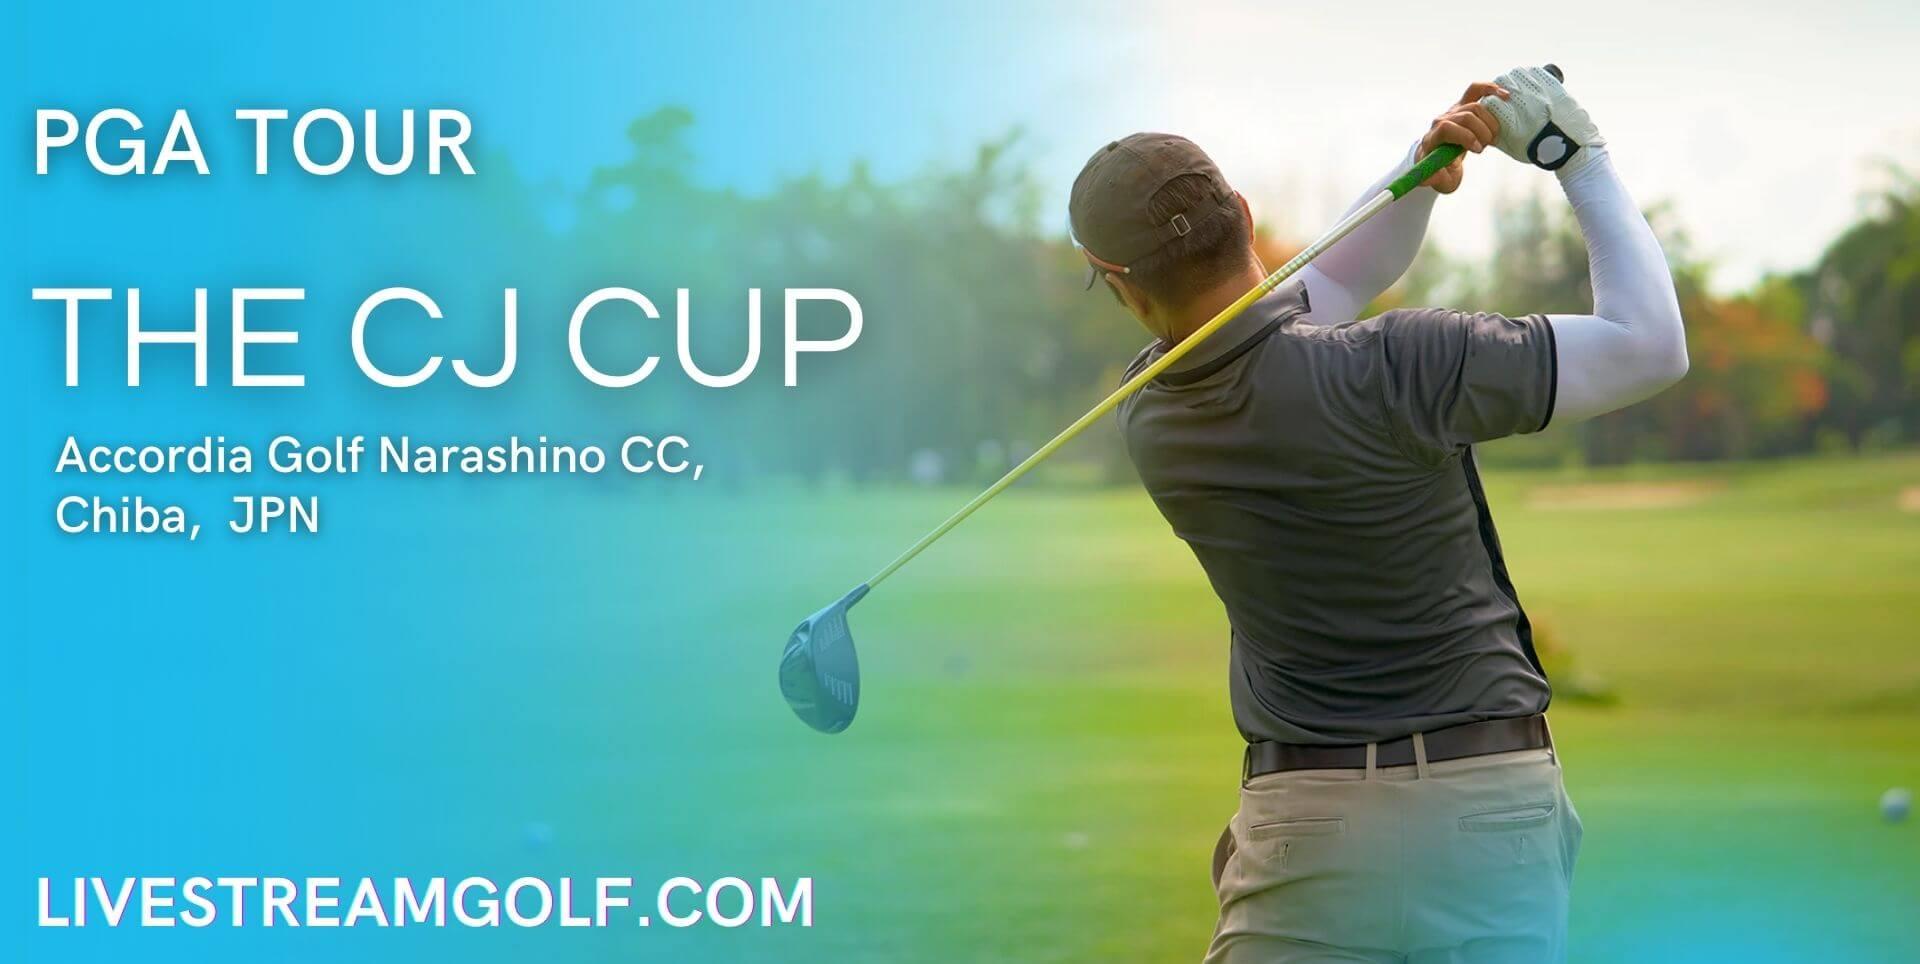 ONLINE-StrEams@!.The CJ Cup LIVE ON fReE Golf 14 Oct 2021